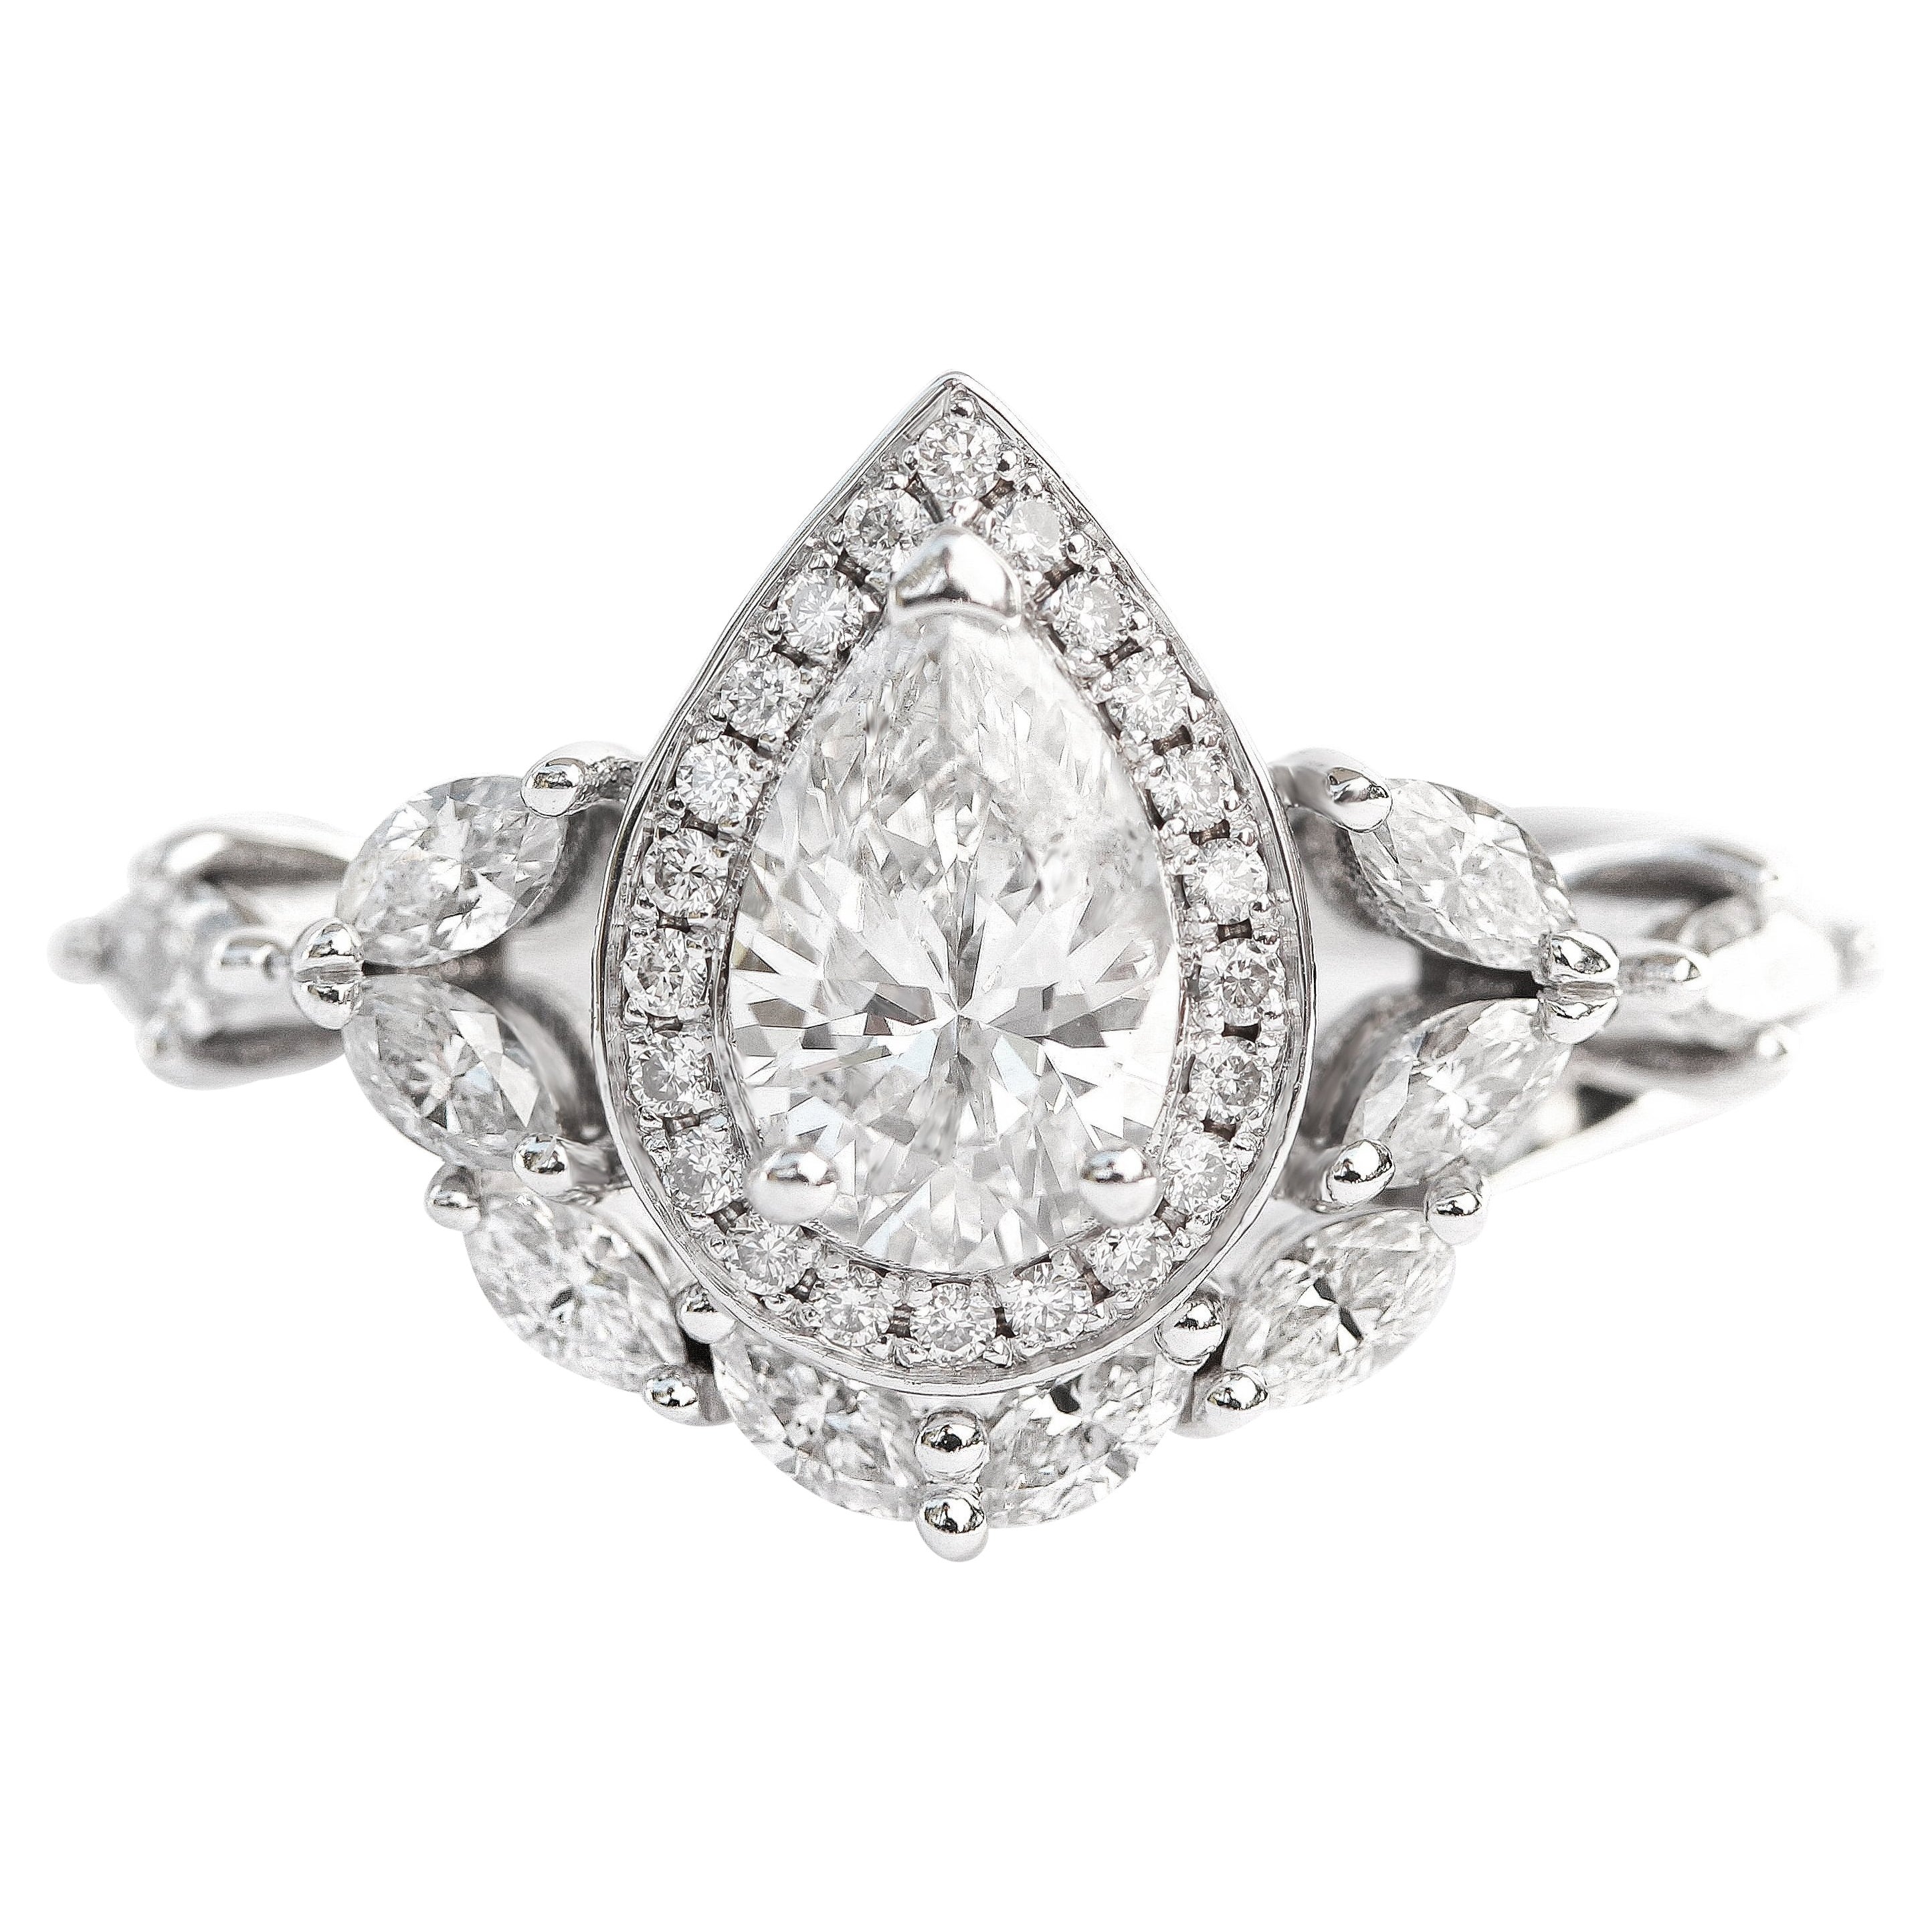 Unique Pear Diamond Halo Engagement Two Rings Set "Muse" For Sale